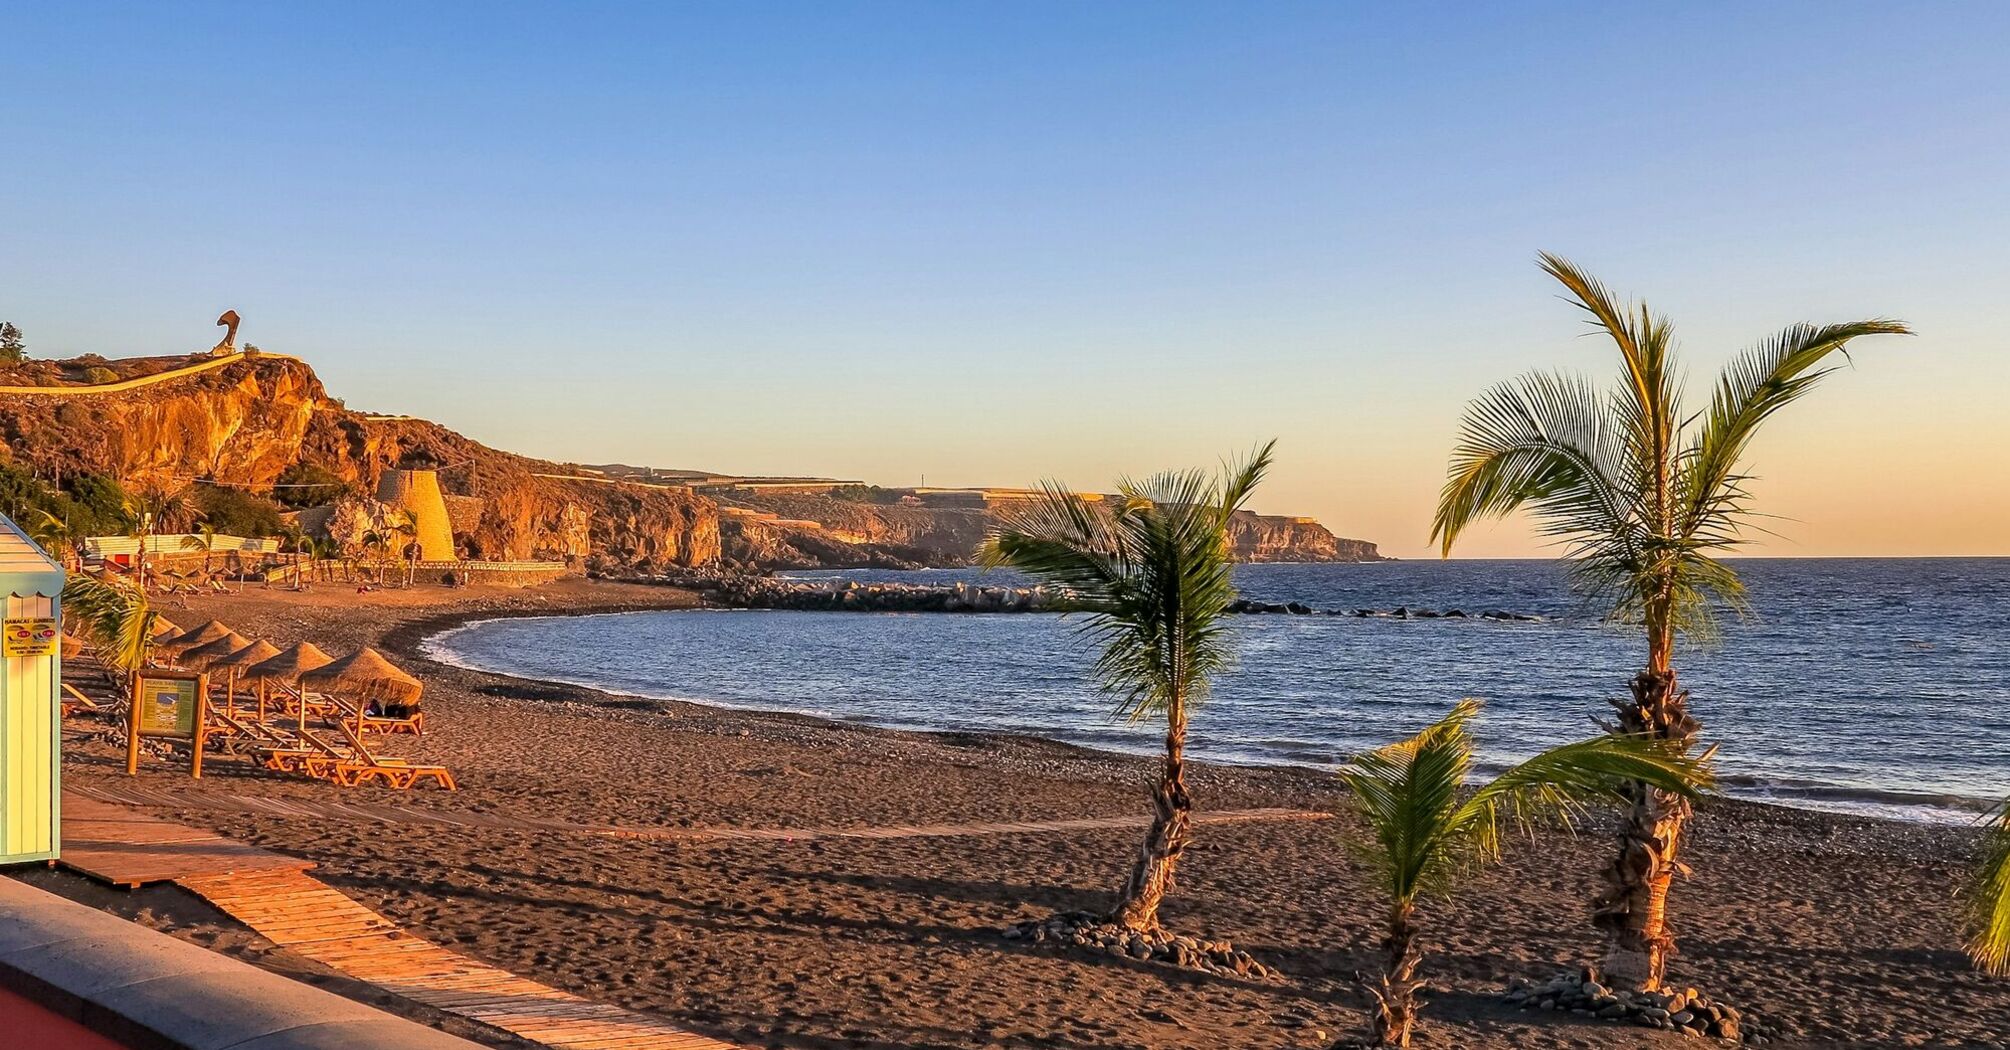 View of a tranquil beach in Tenerife with palm trees in the foreground and cliffs in the distance during sunset